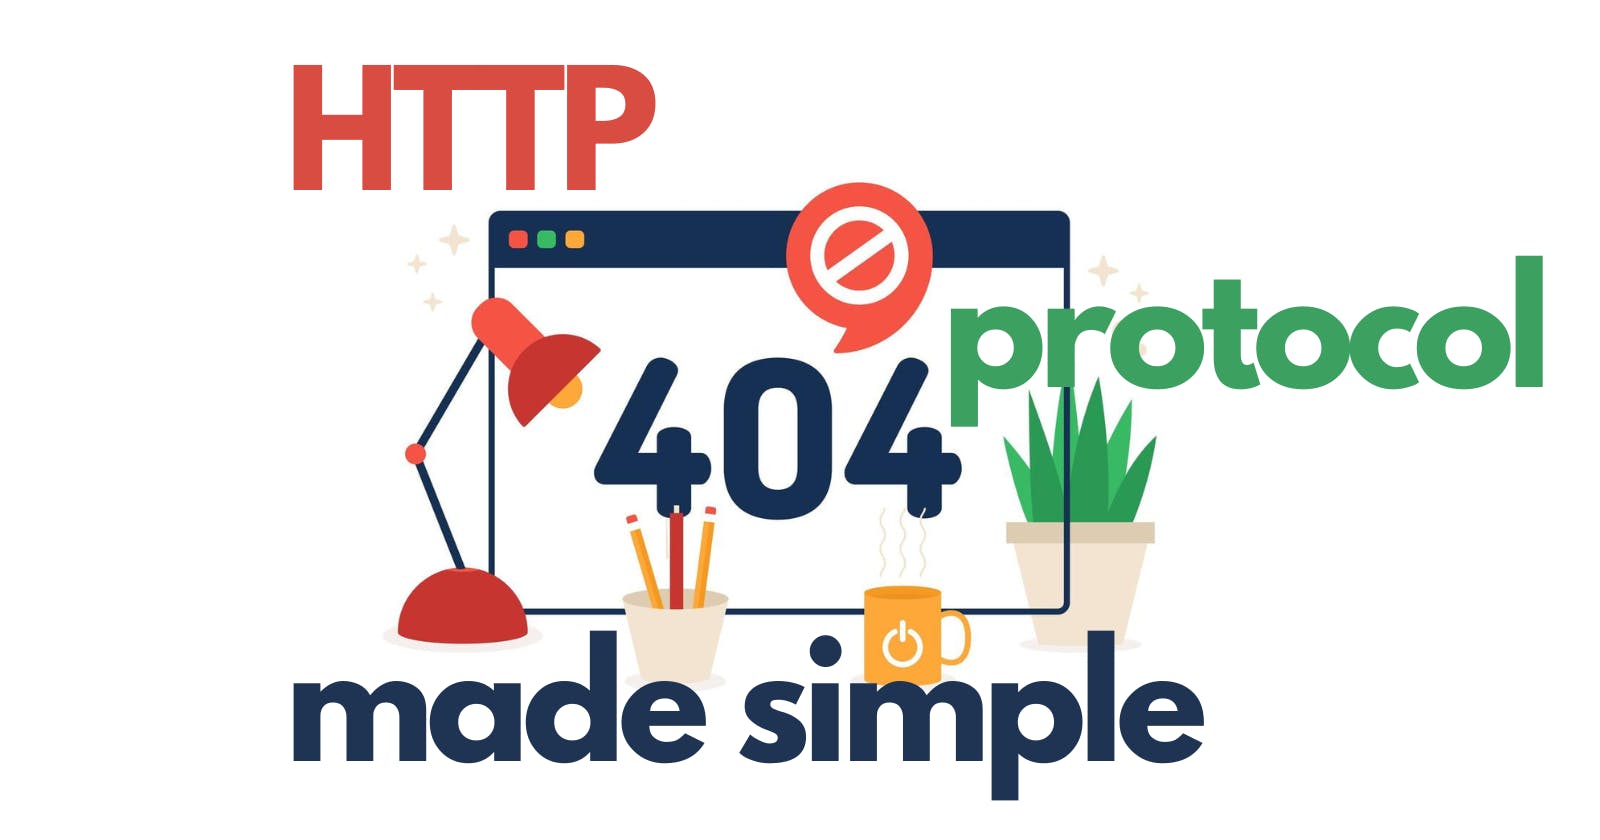 HTTP protocol made simple